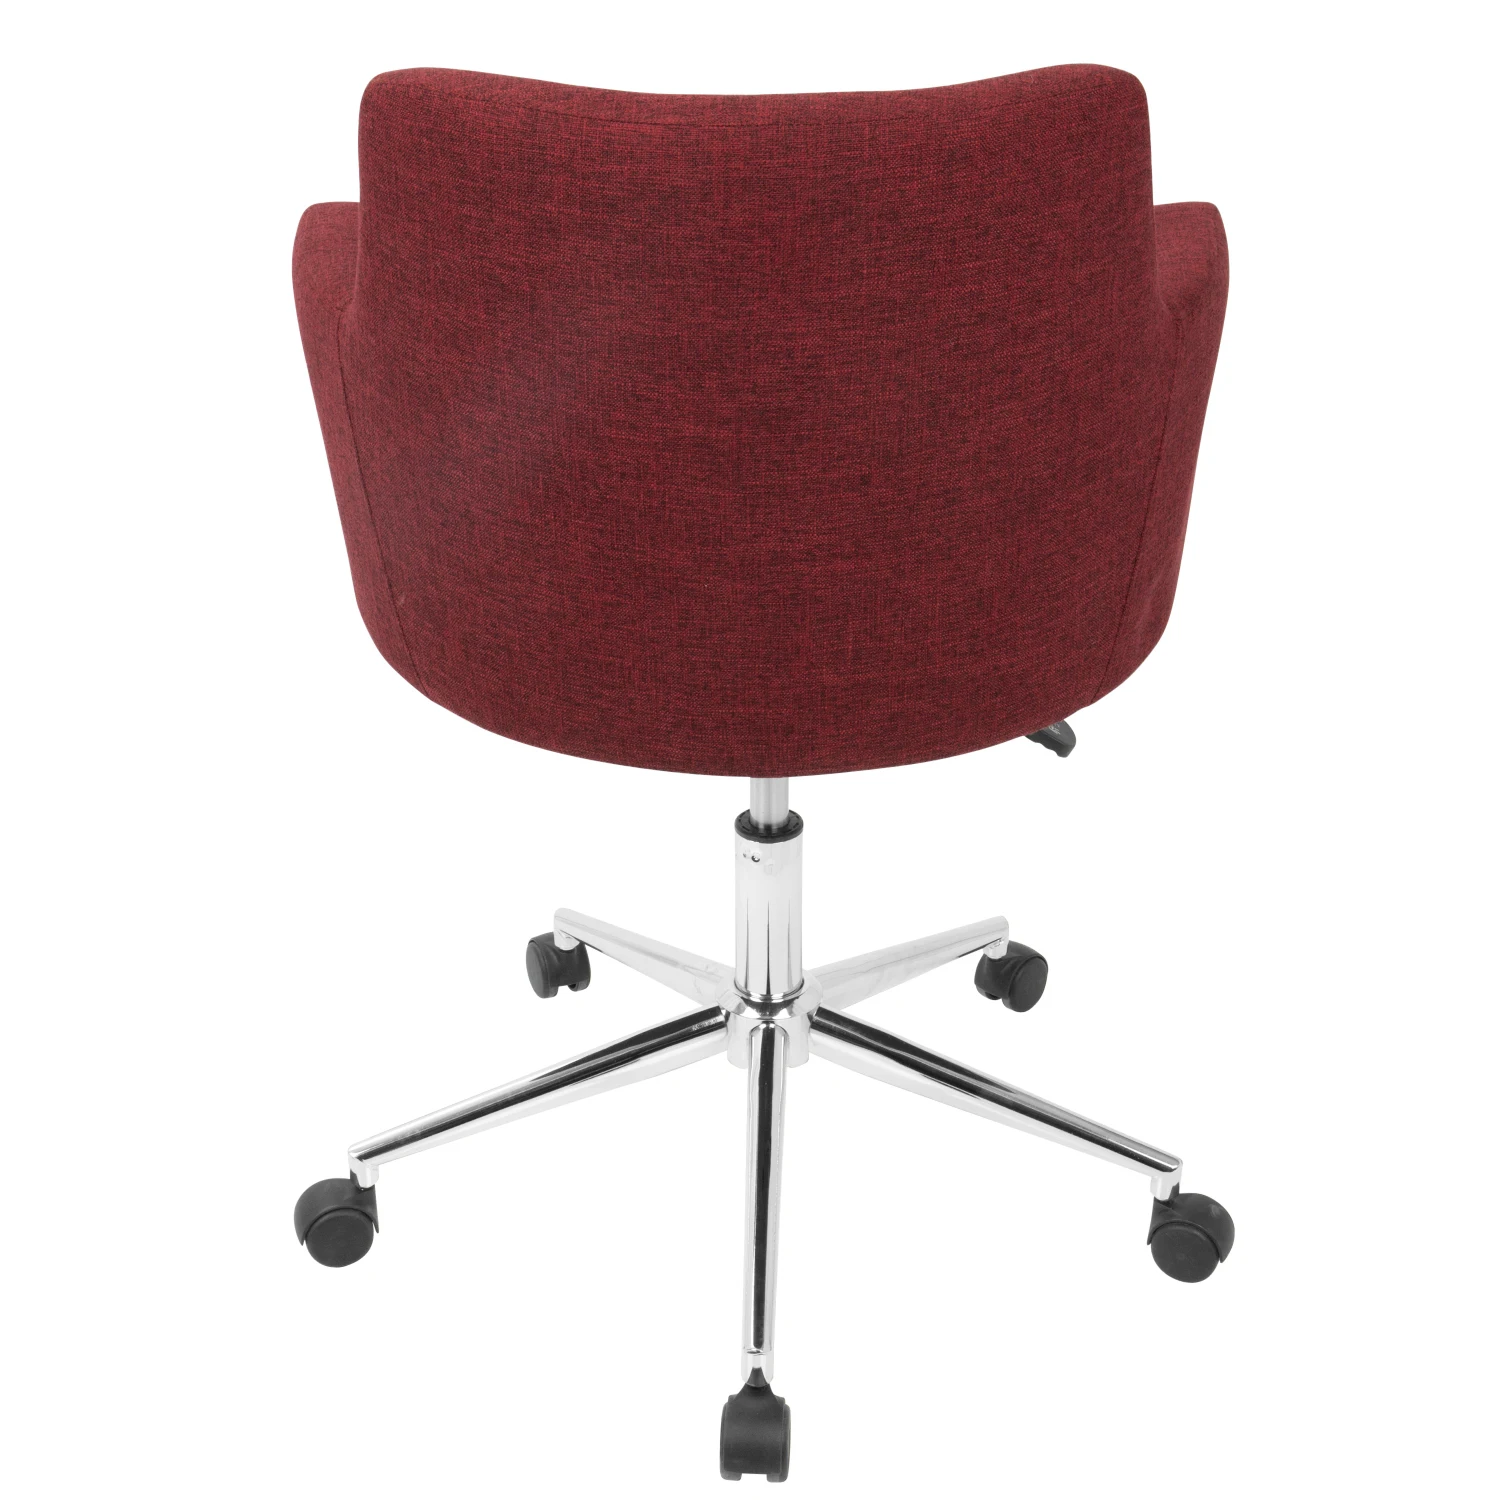 Contemporary Red Adjustable Office Chair with Modern Design and Ergonomic Support from LumiSource